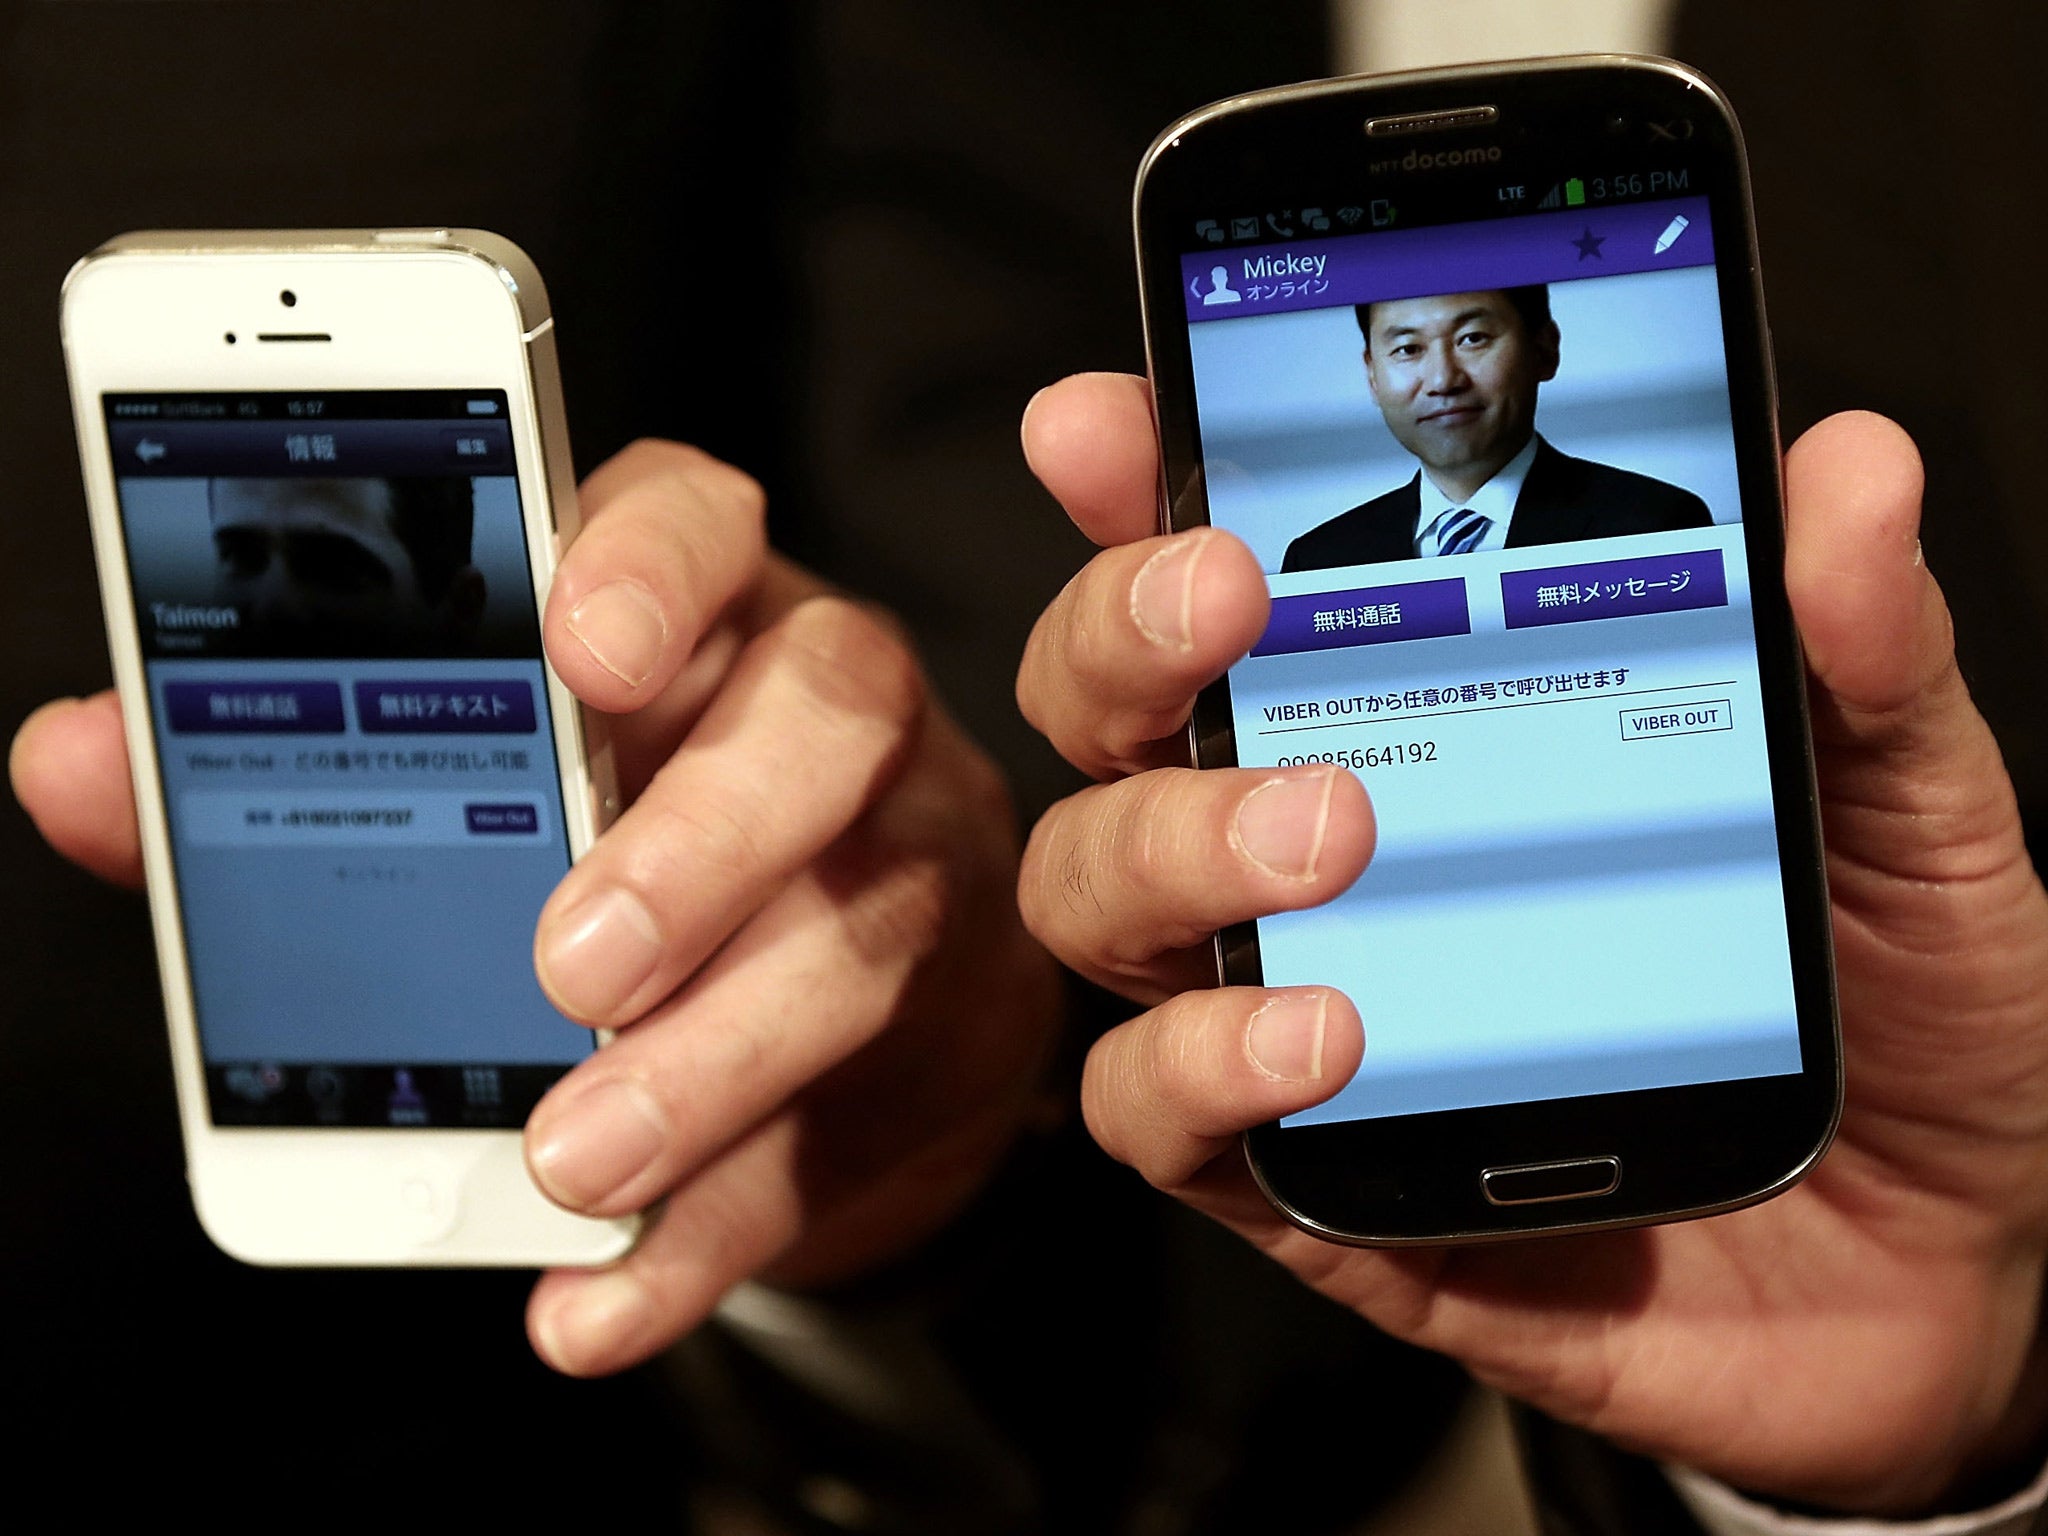 Hiroshi Mikitani, chairman and chief executive officer of Rakuten Inc. is pictured in the Viber app on the phone of Talmon Marco